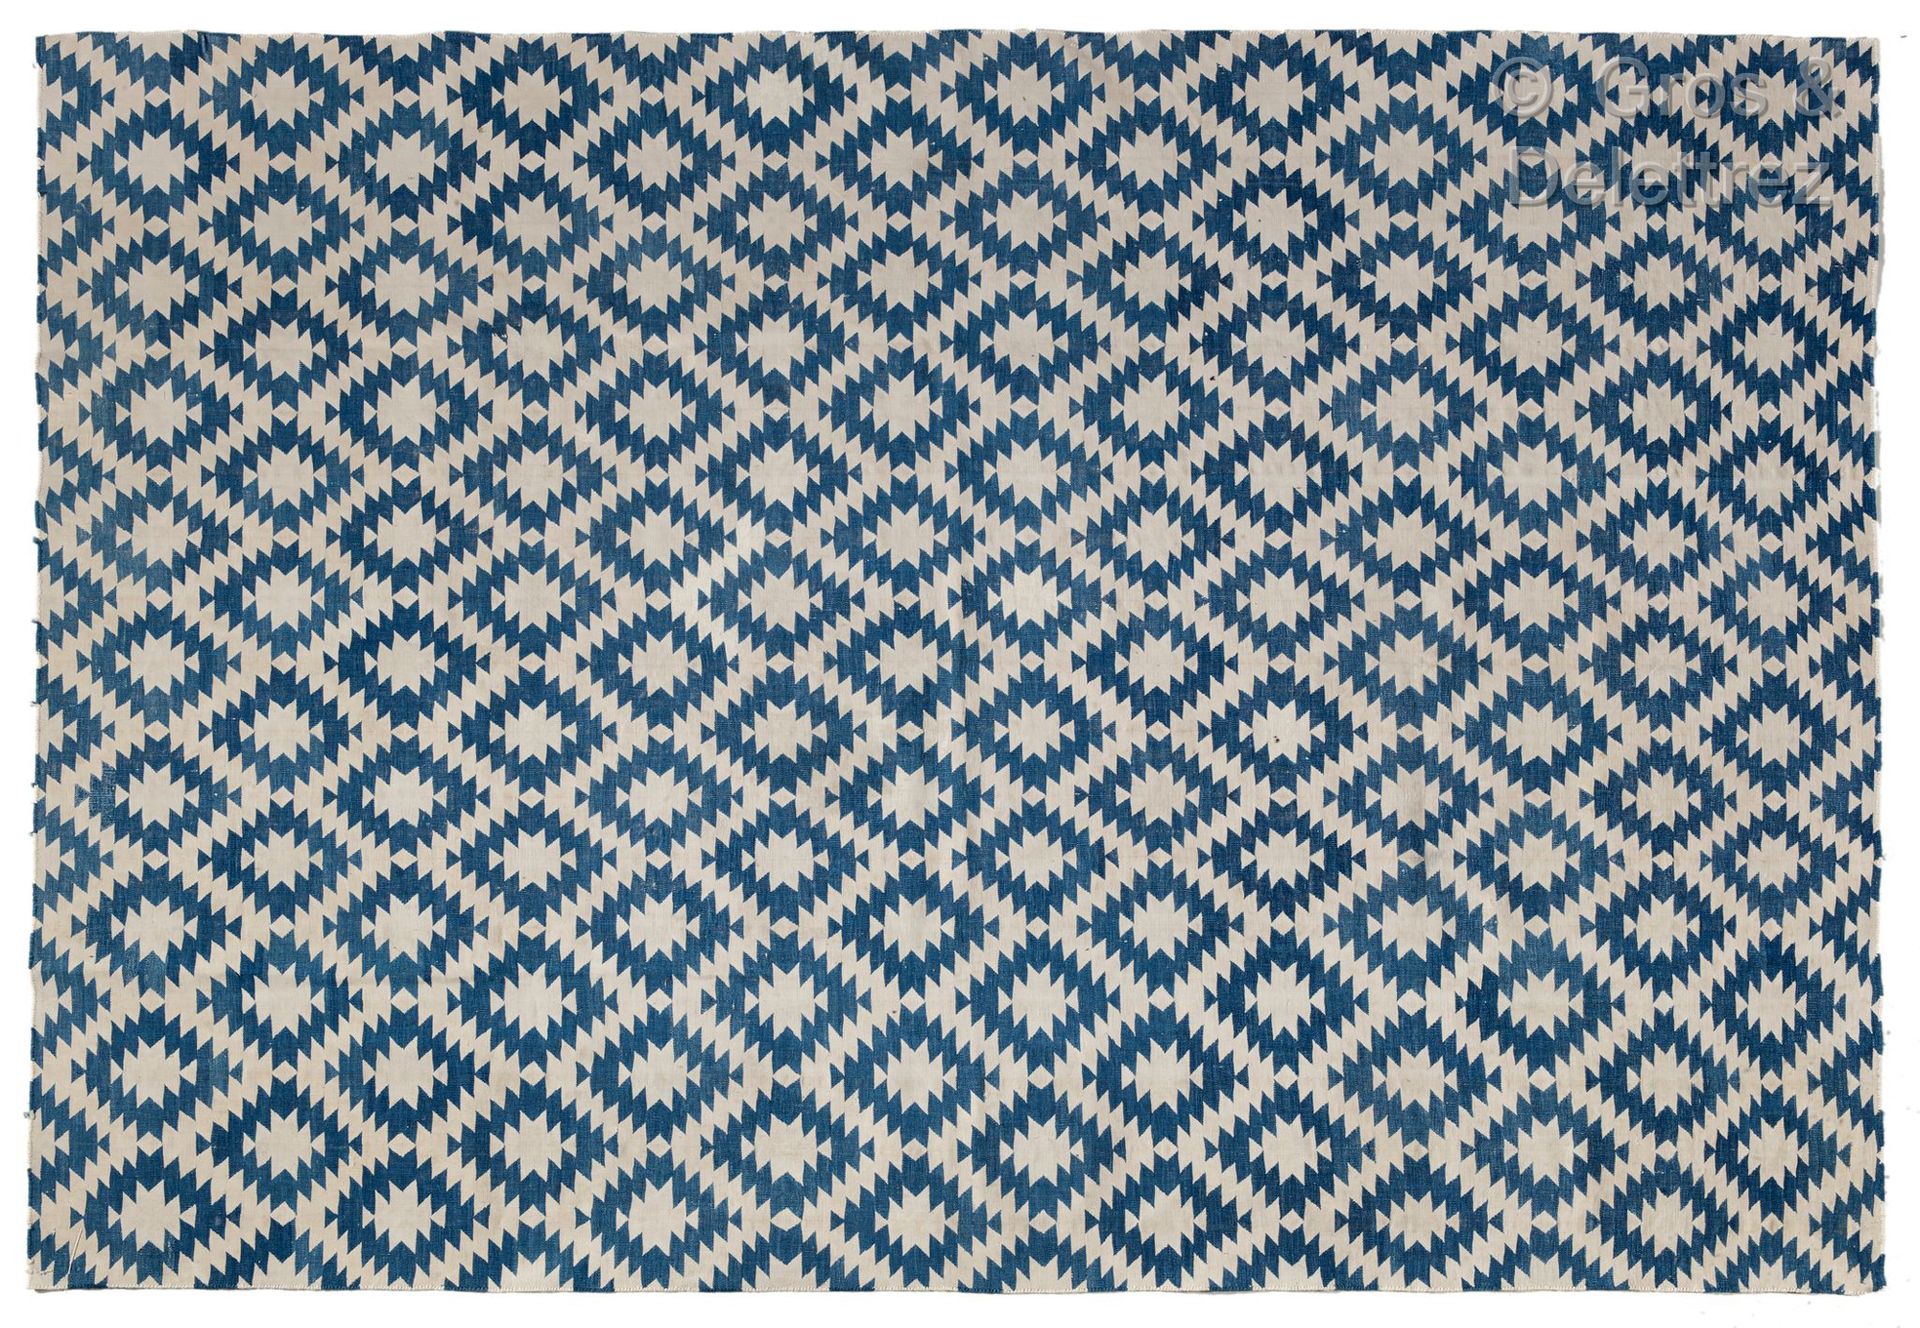 INDIAN DHURRIE Carpet in short wool with blue and white geometric decoration.

D&hellip;